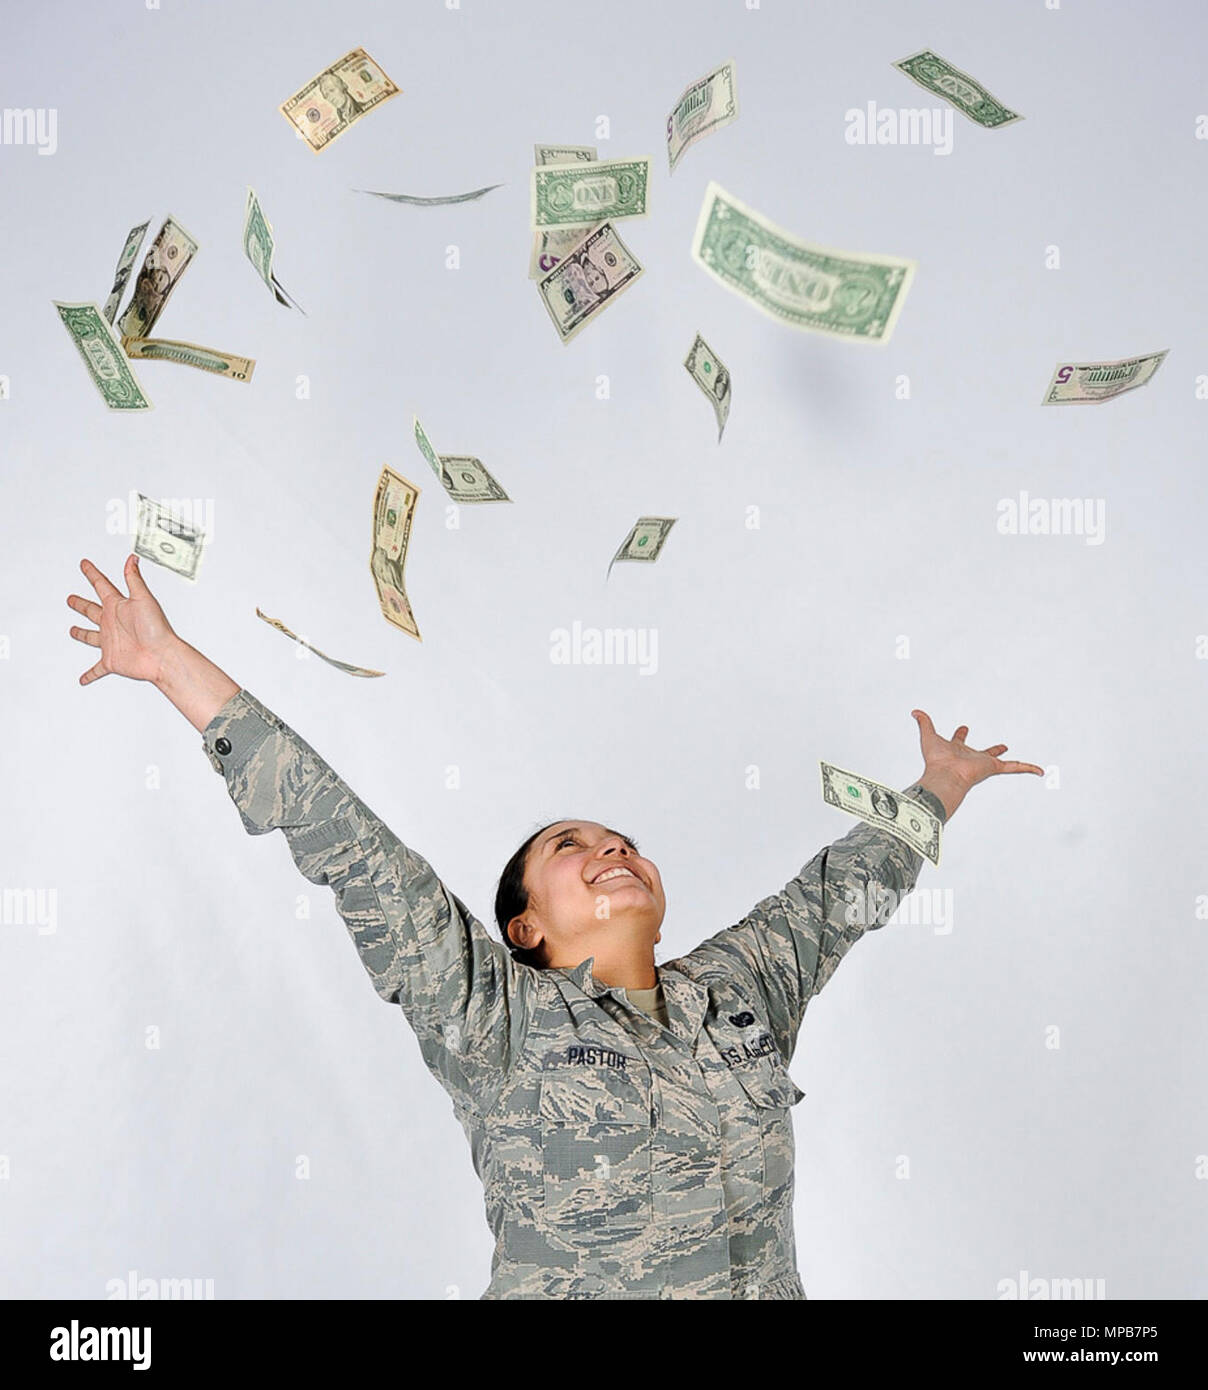 Airman 1st Class Daniela Pastor, 86th Airlift Wing Judge Advocate paralegal, throws money into the air on Ramstein Air Base, April 7, 2017. Beginning in 2018, service members have the opportunity to opt-into a new Blended Retirement System, and can get automatic and matching Thrift Savings Plan contributions as well as mid-career compensation incentives in addition to a monthly annuity for life. Stock Photo